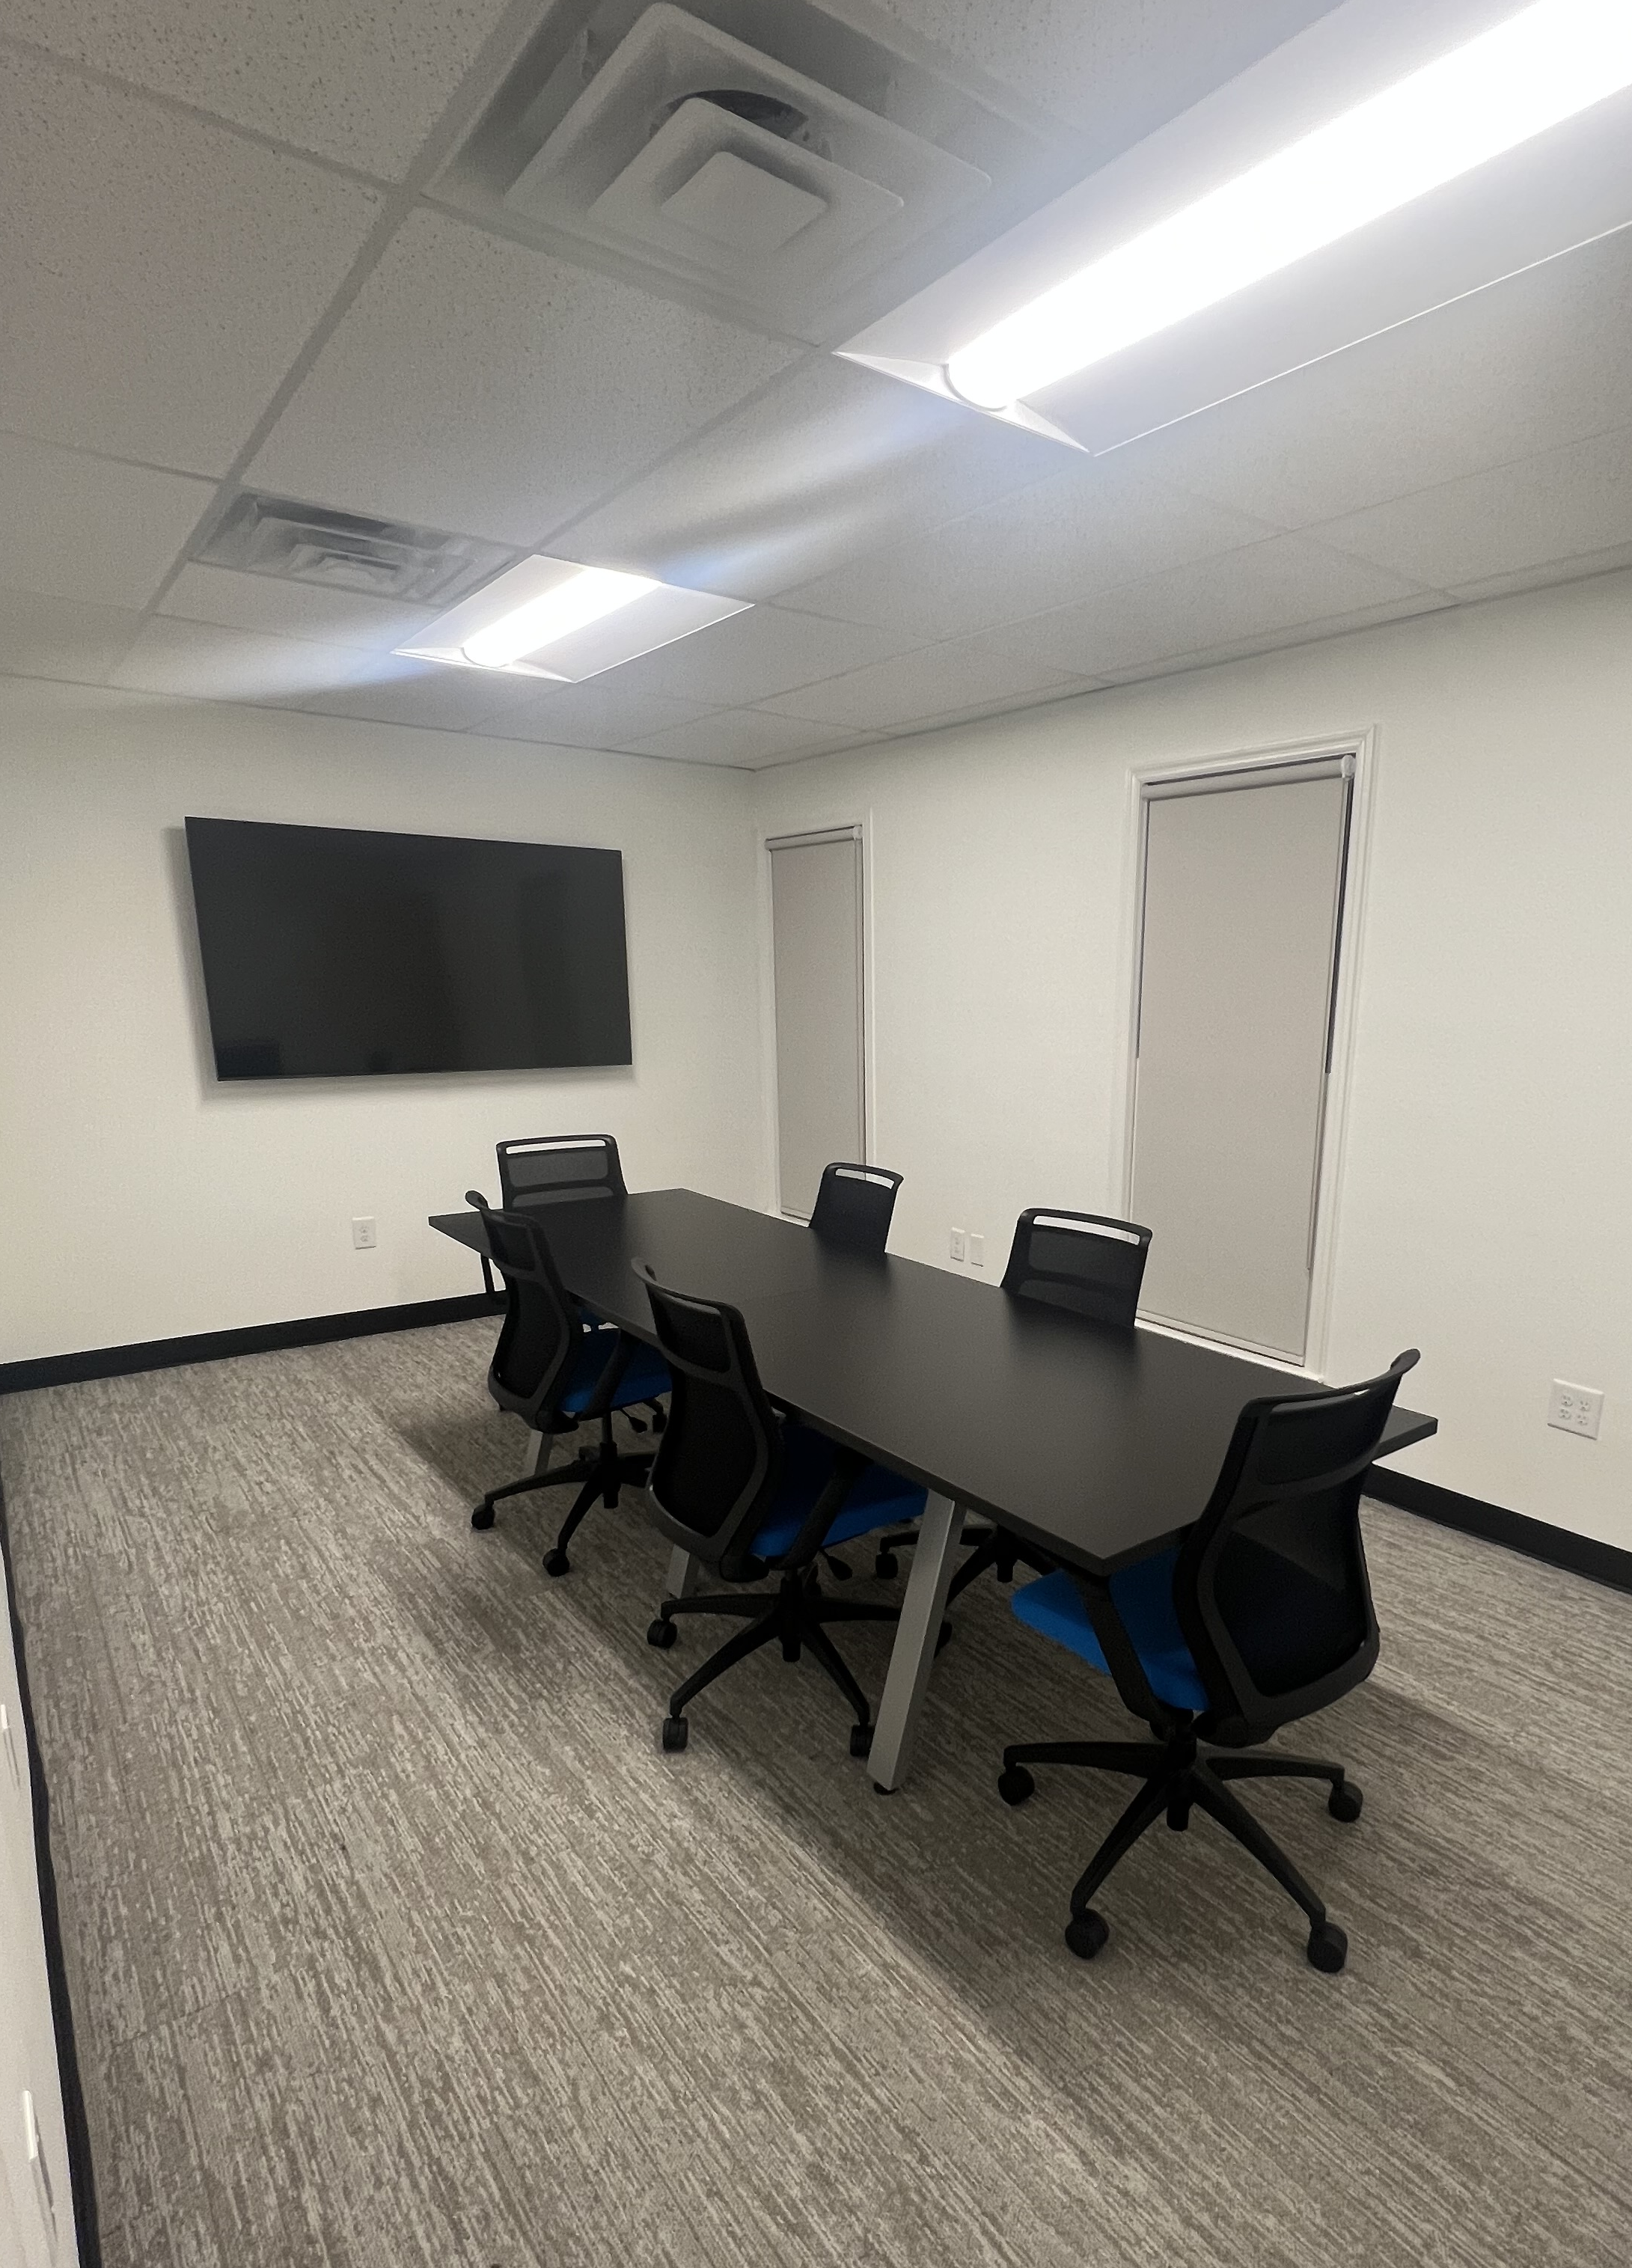 Conference room with a long table with six office chairs and a TV on the wall